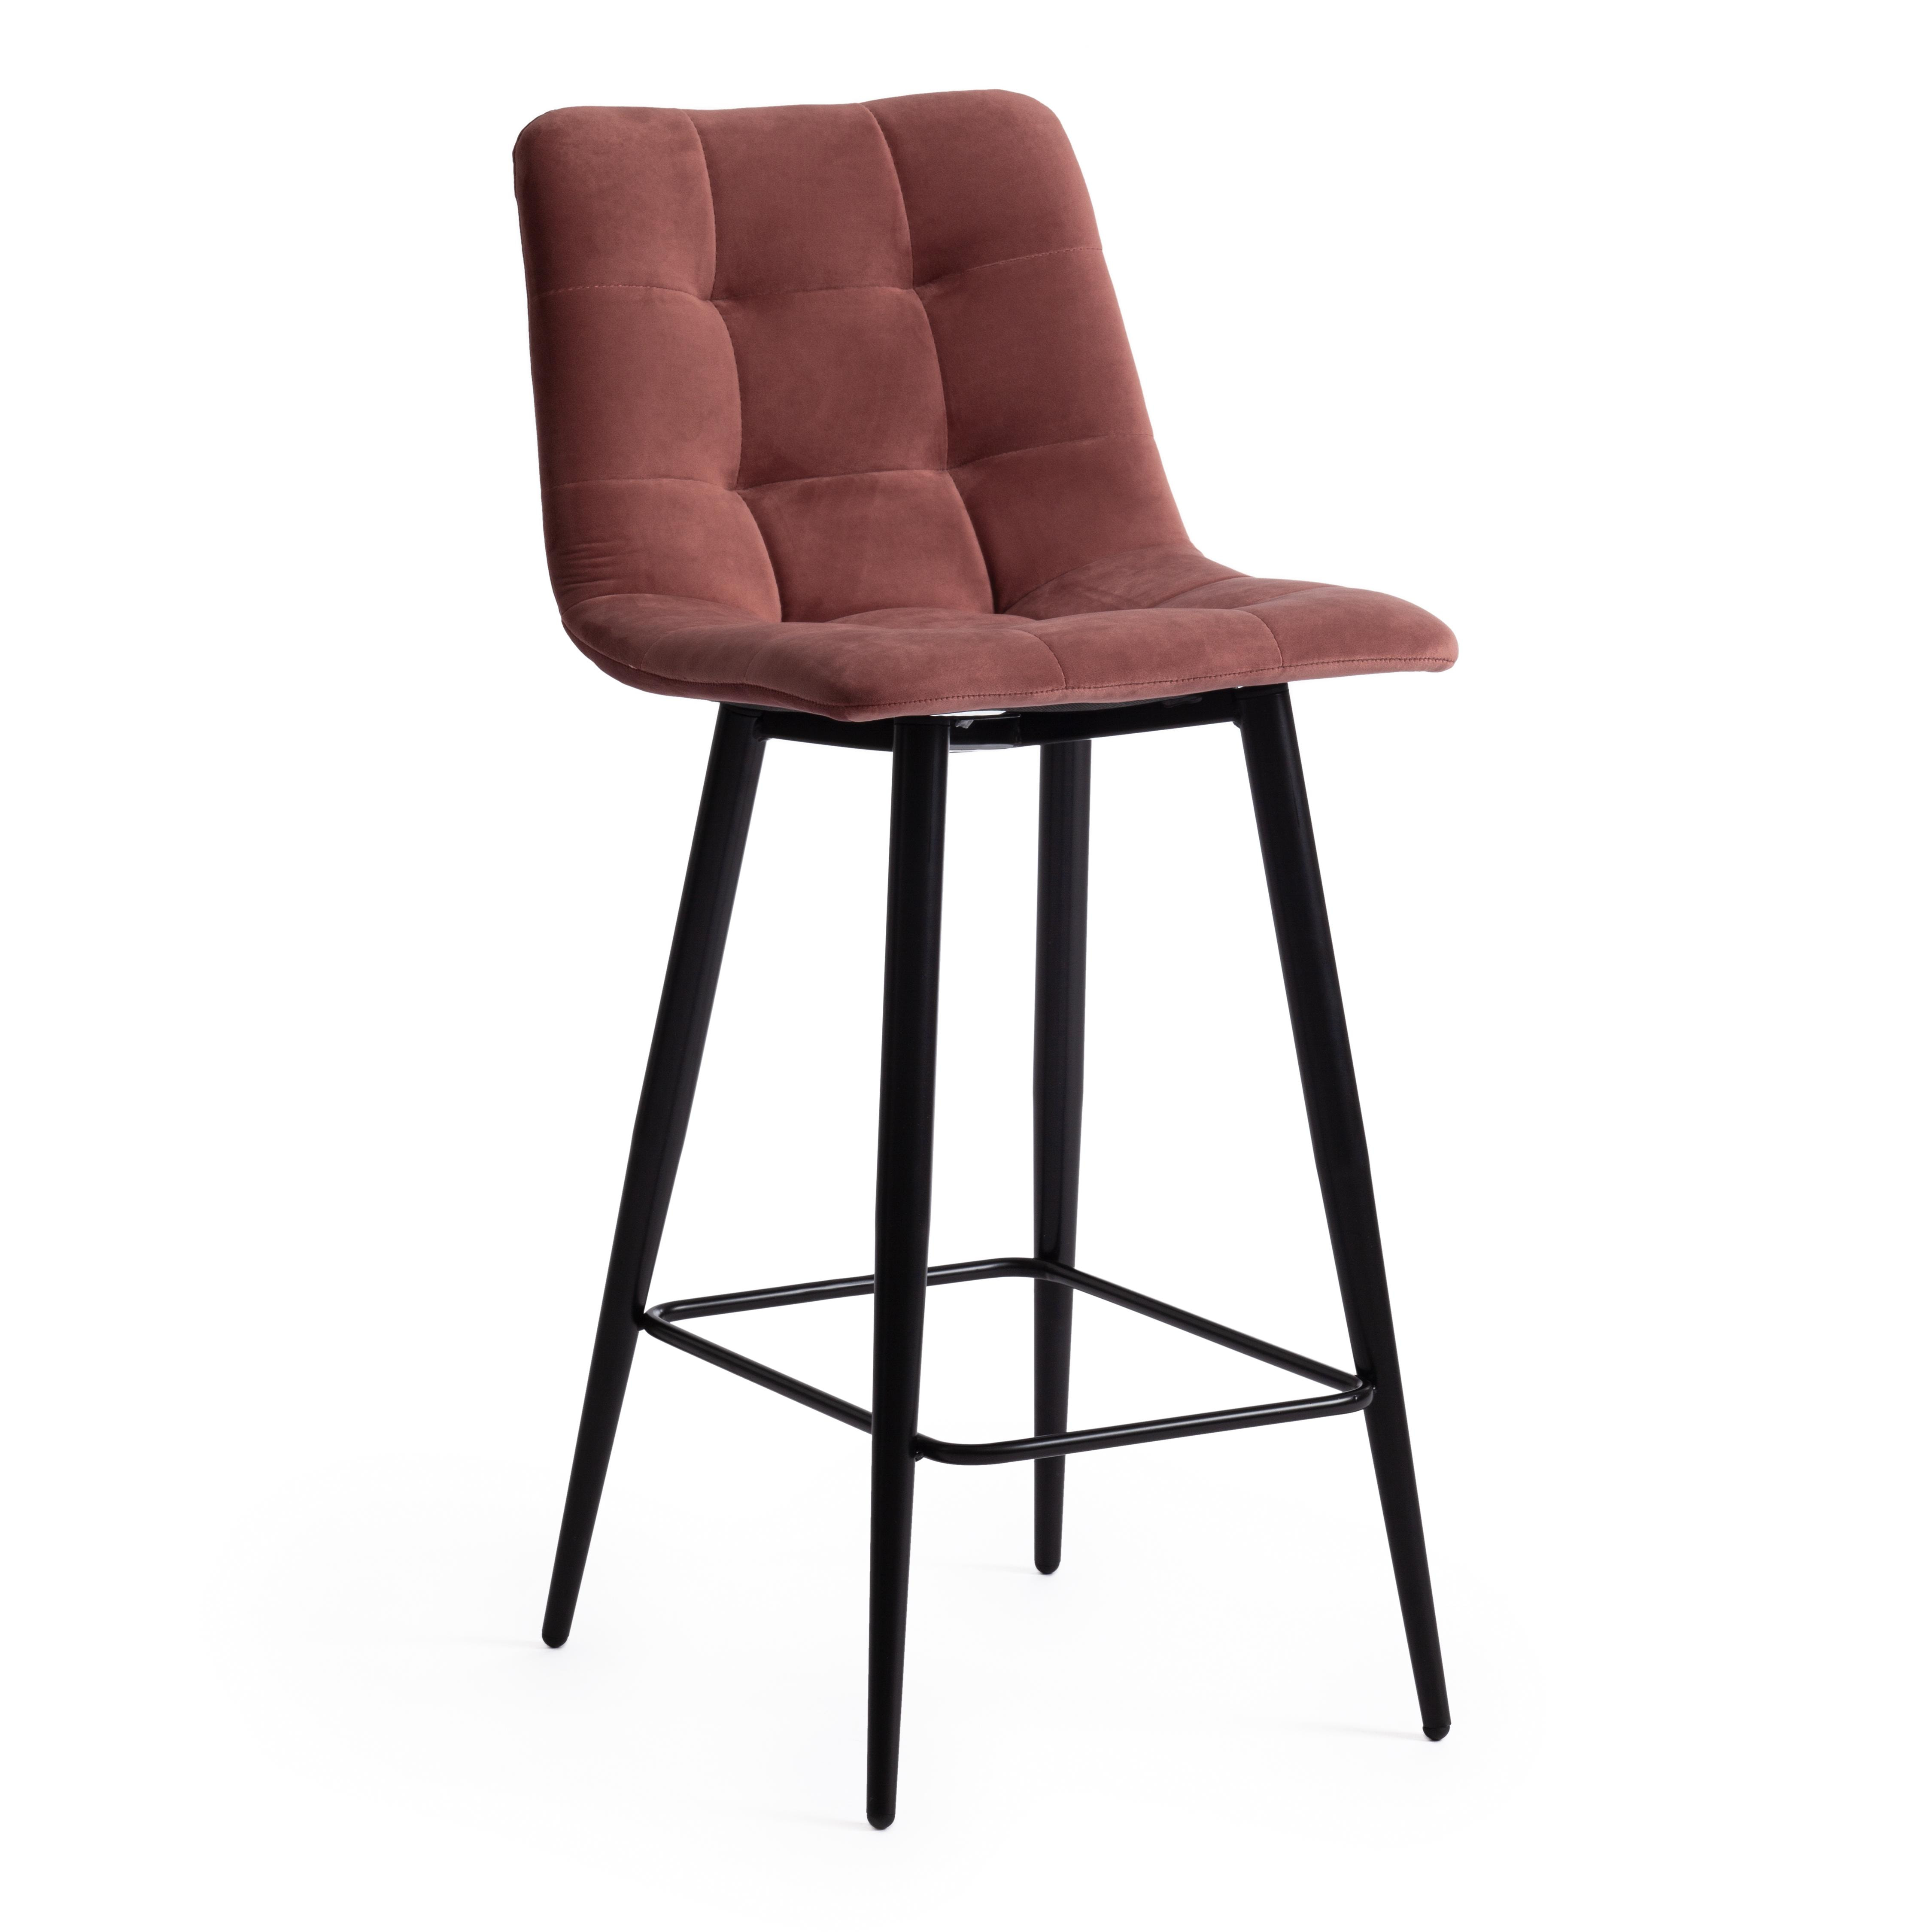   TetChair Chilly 7095 coral barkhat